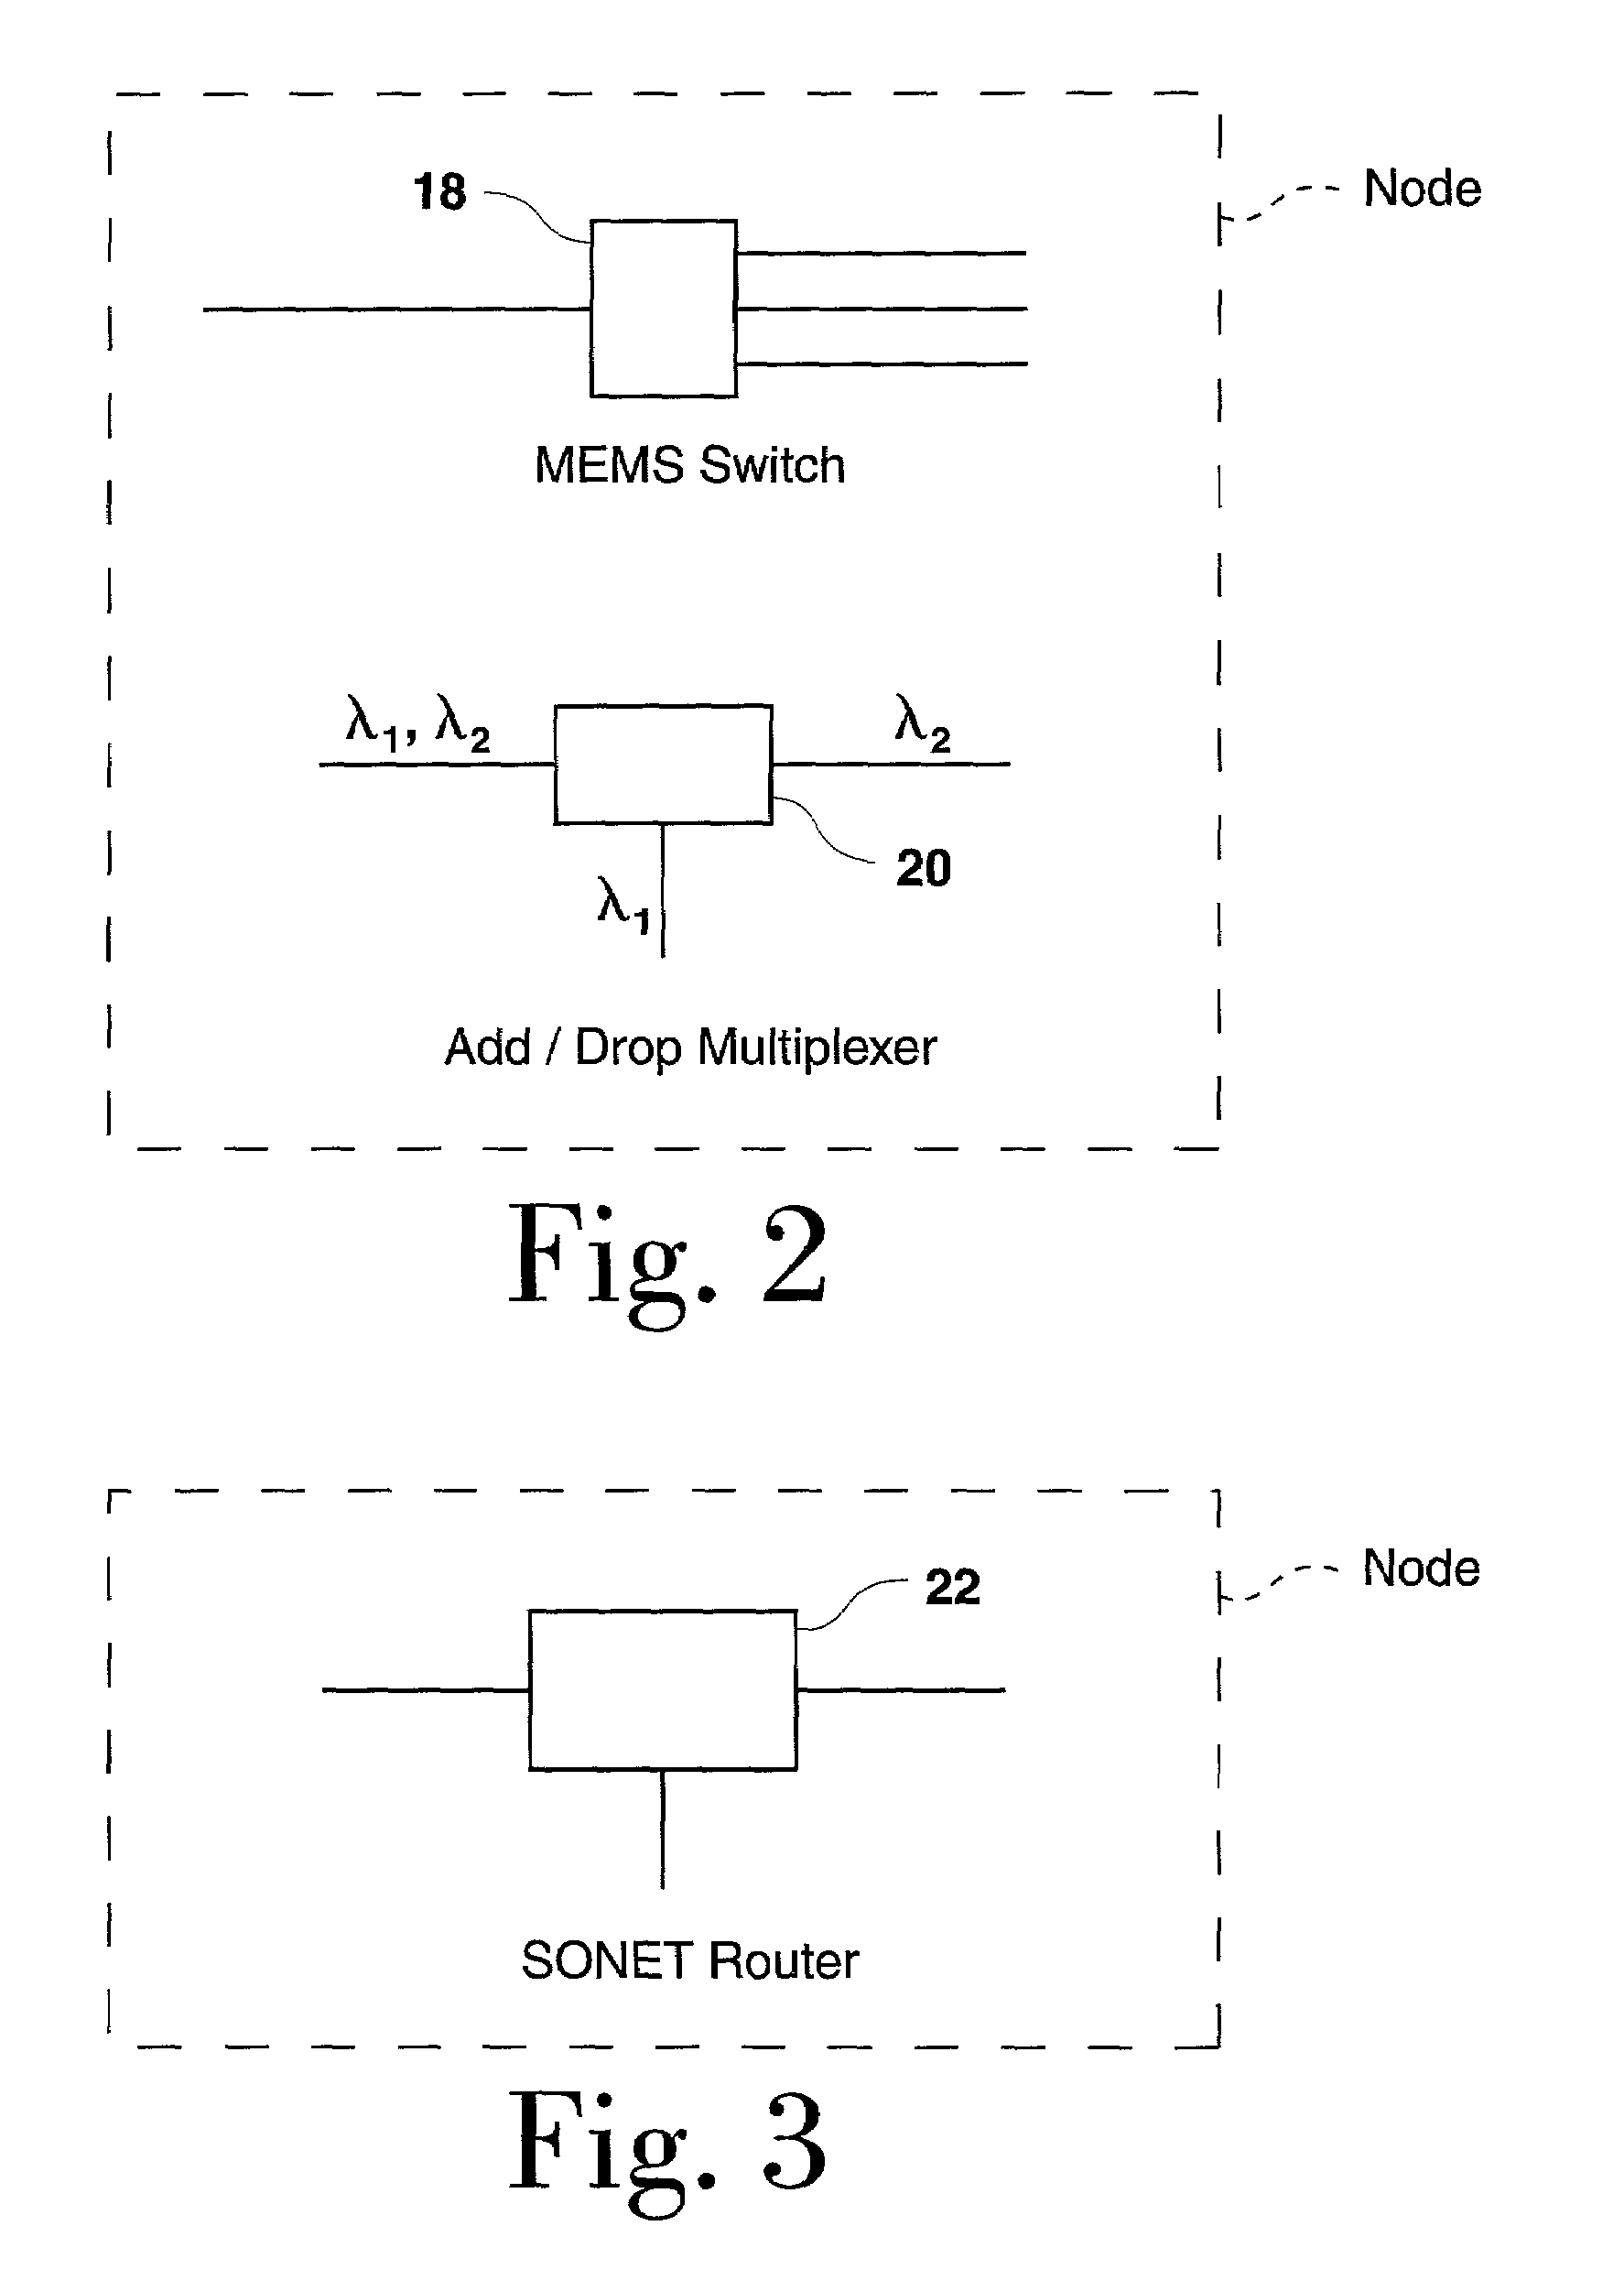 Method and apparatus for multiplexing in a wireless communication infrastructure